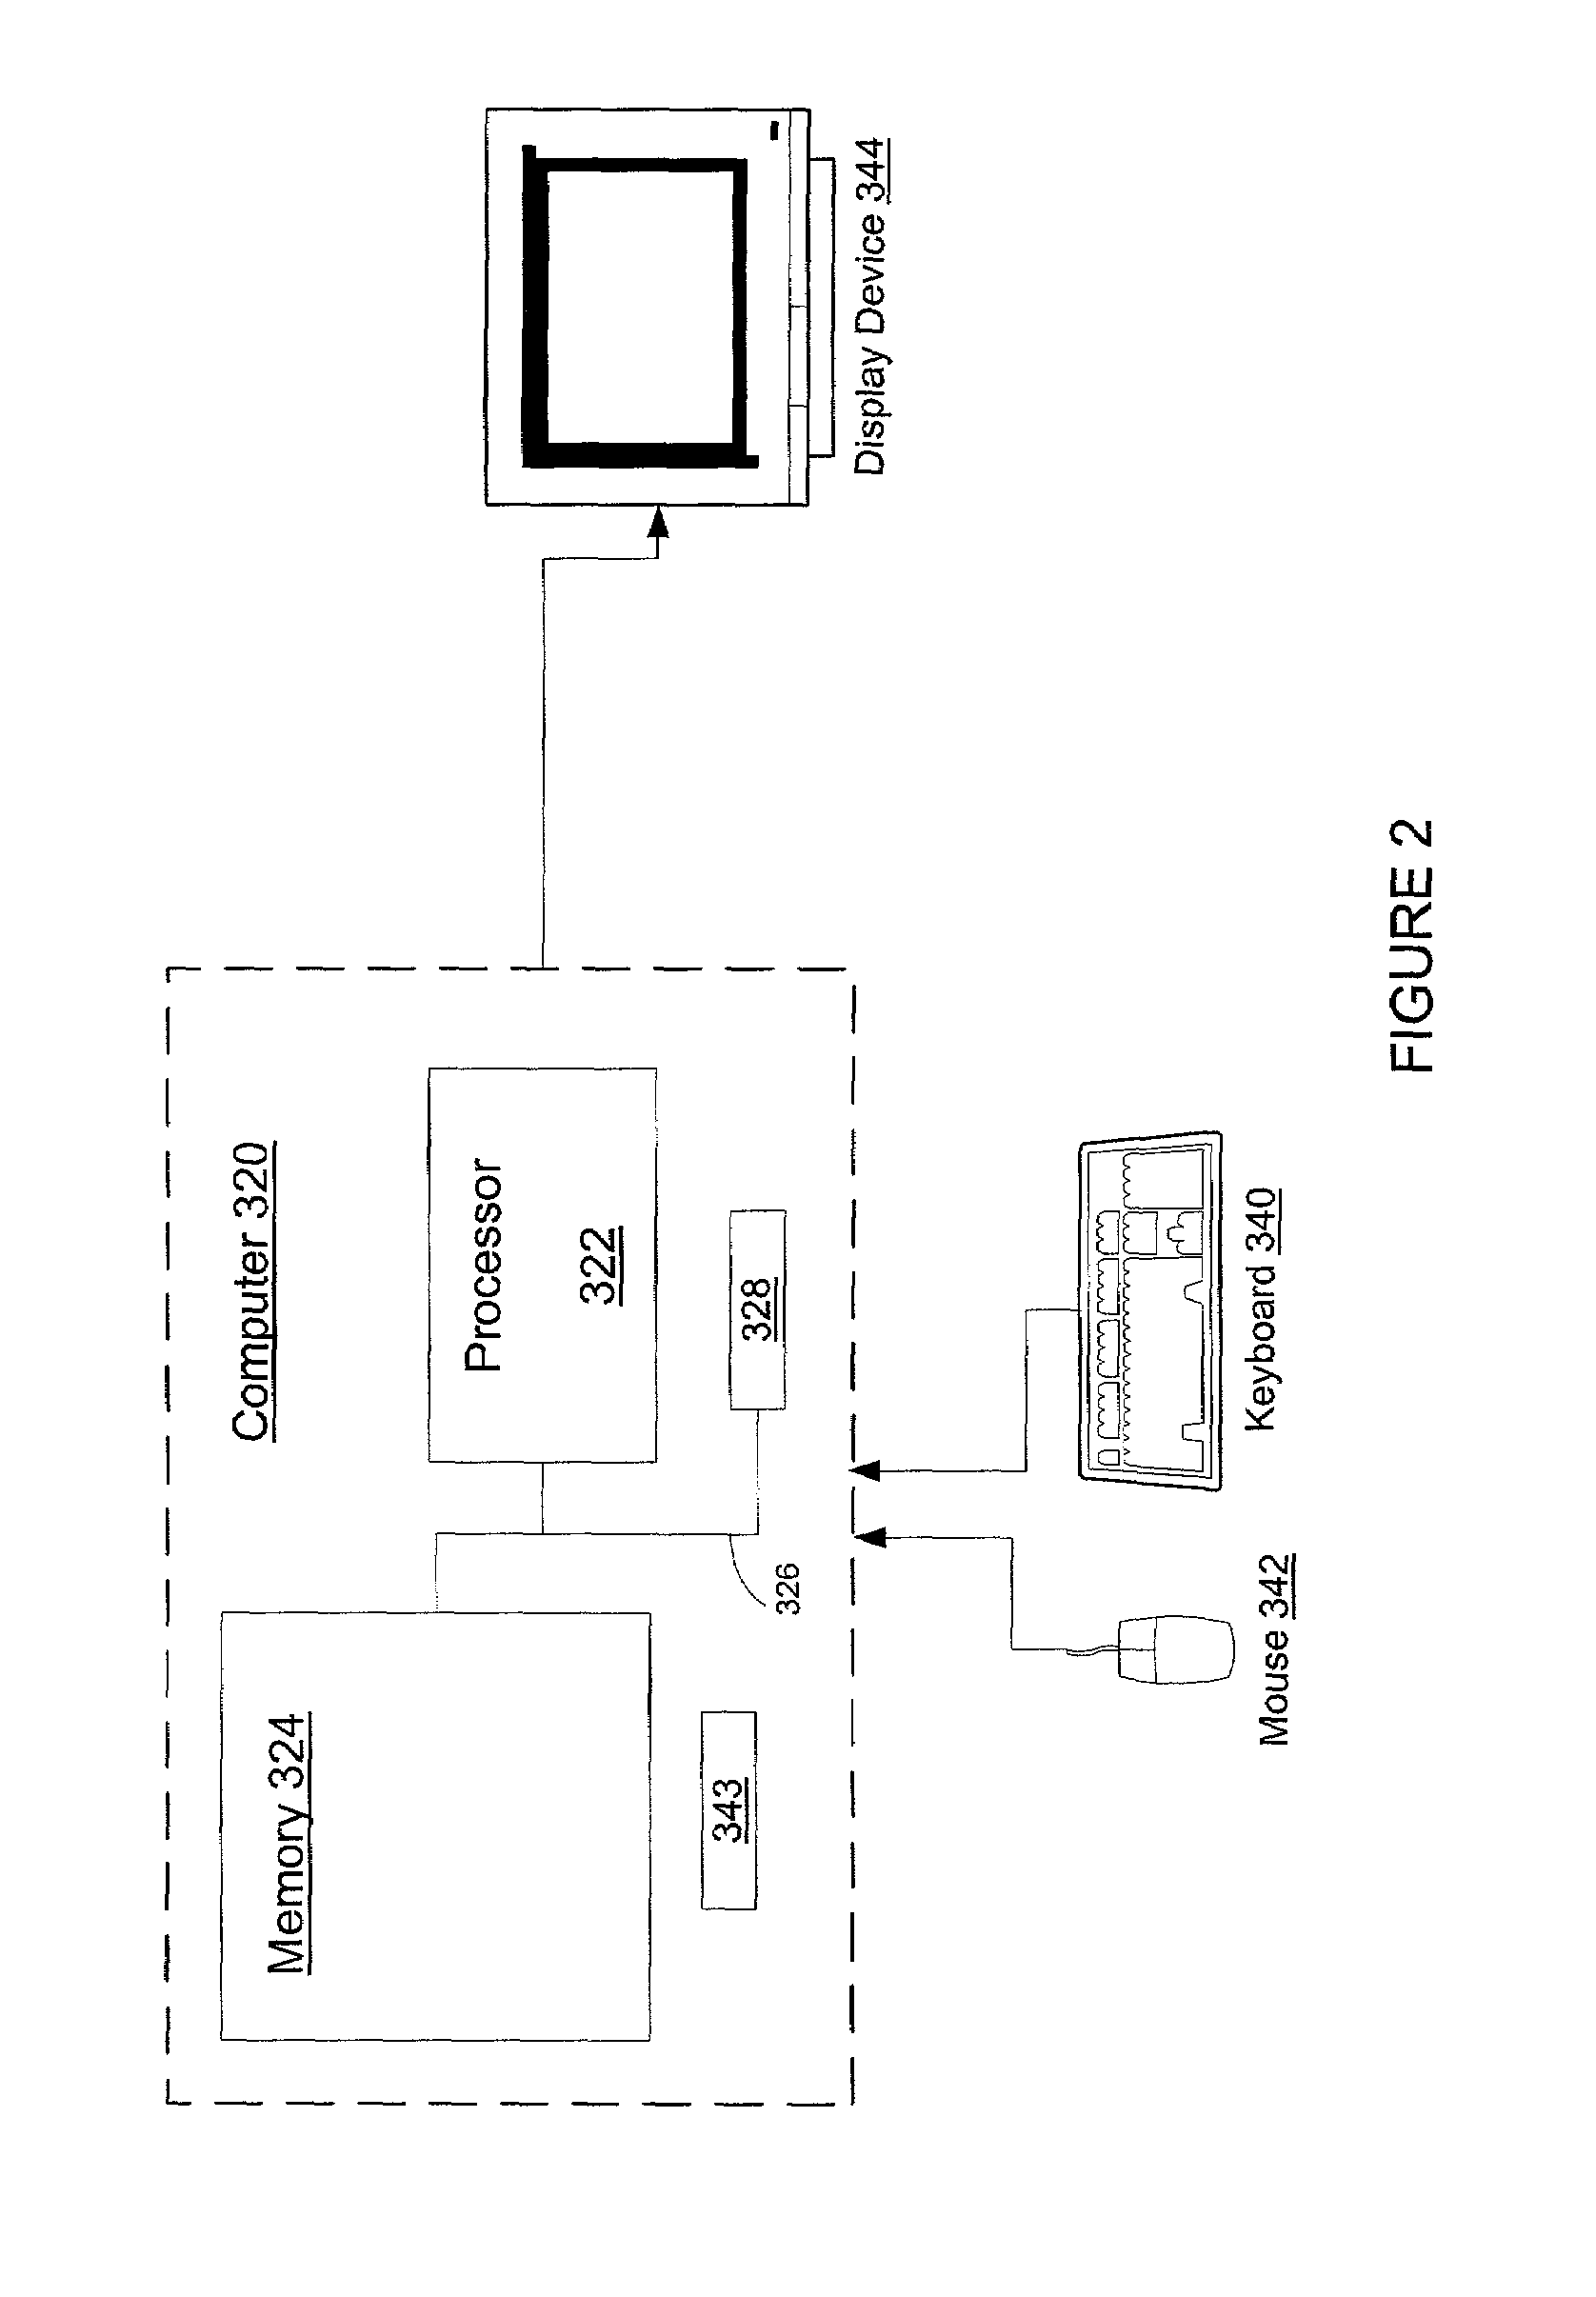 System and method for sorting e-mail using a vendor registration code and a vendor registration purpose code previously assigned by a recipient